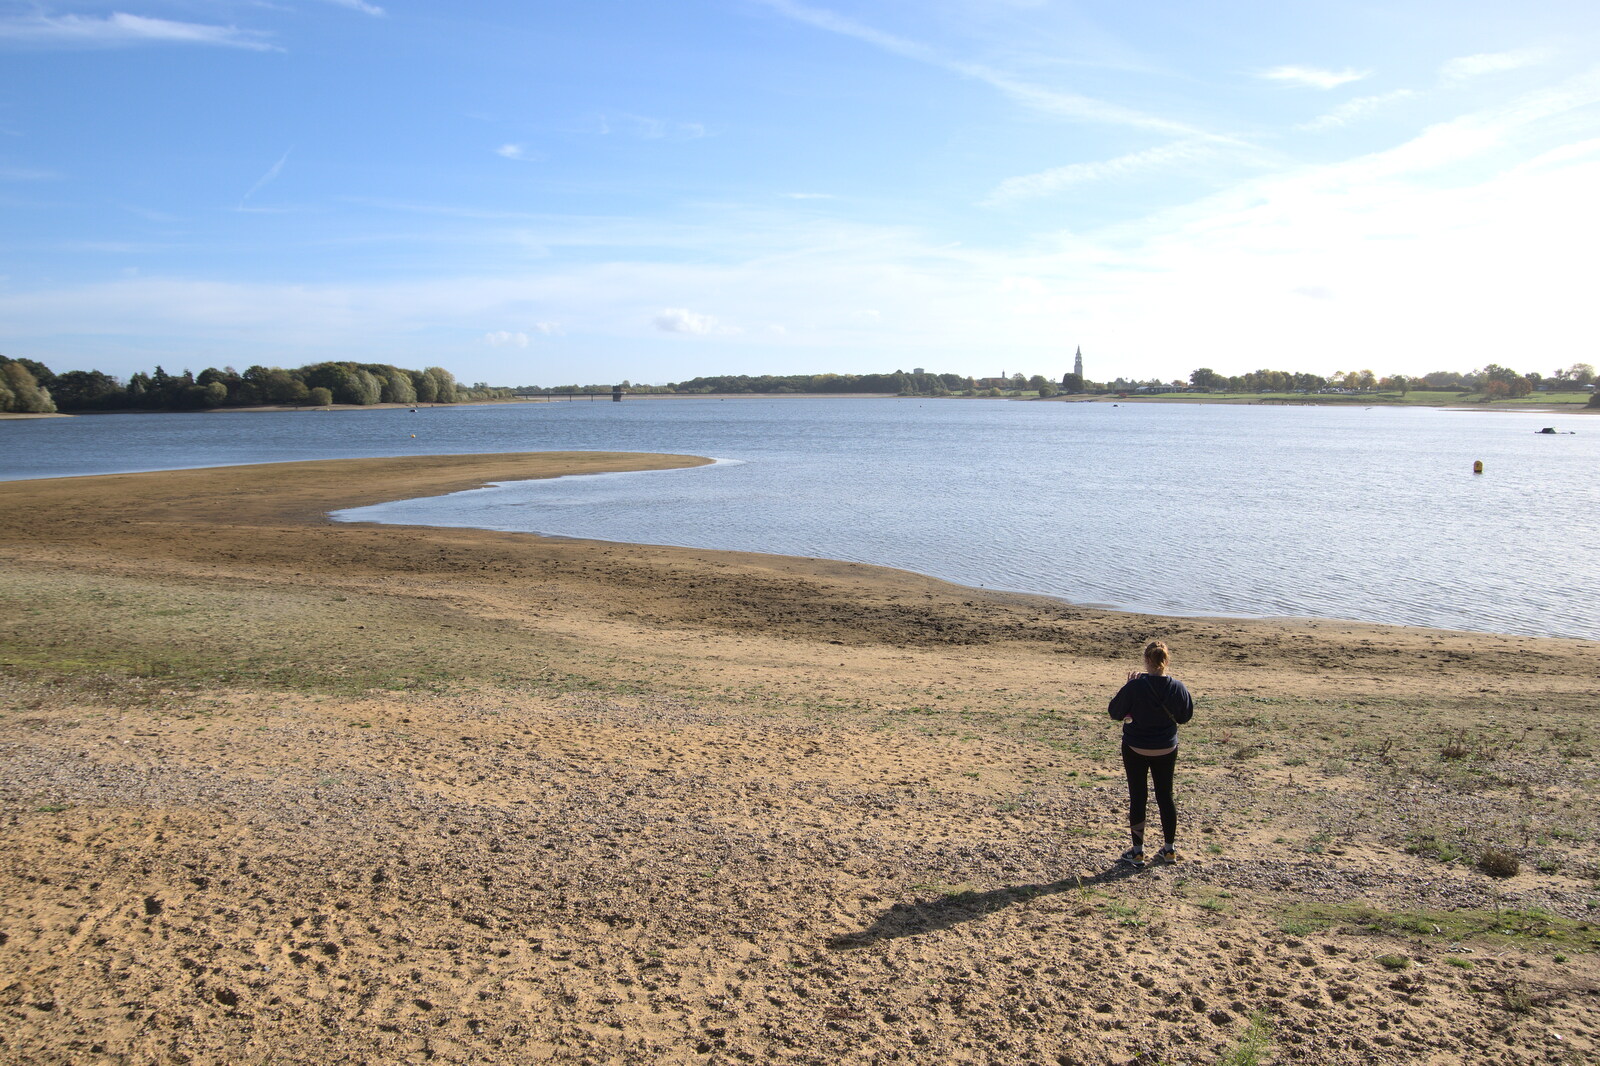 A Few Hours at Alton Water, Stutton, Suffolk - 22nd October 2022: Alton Water is a bit low at the moment